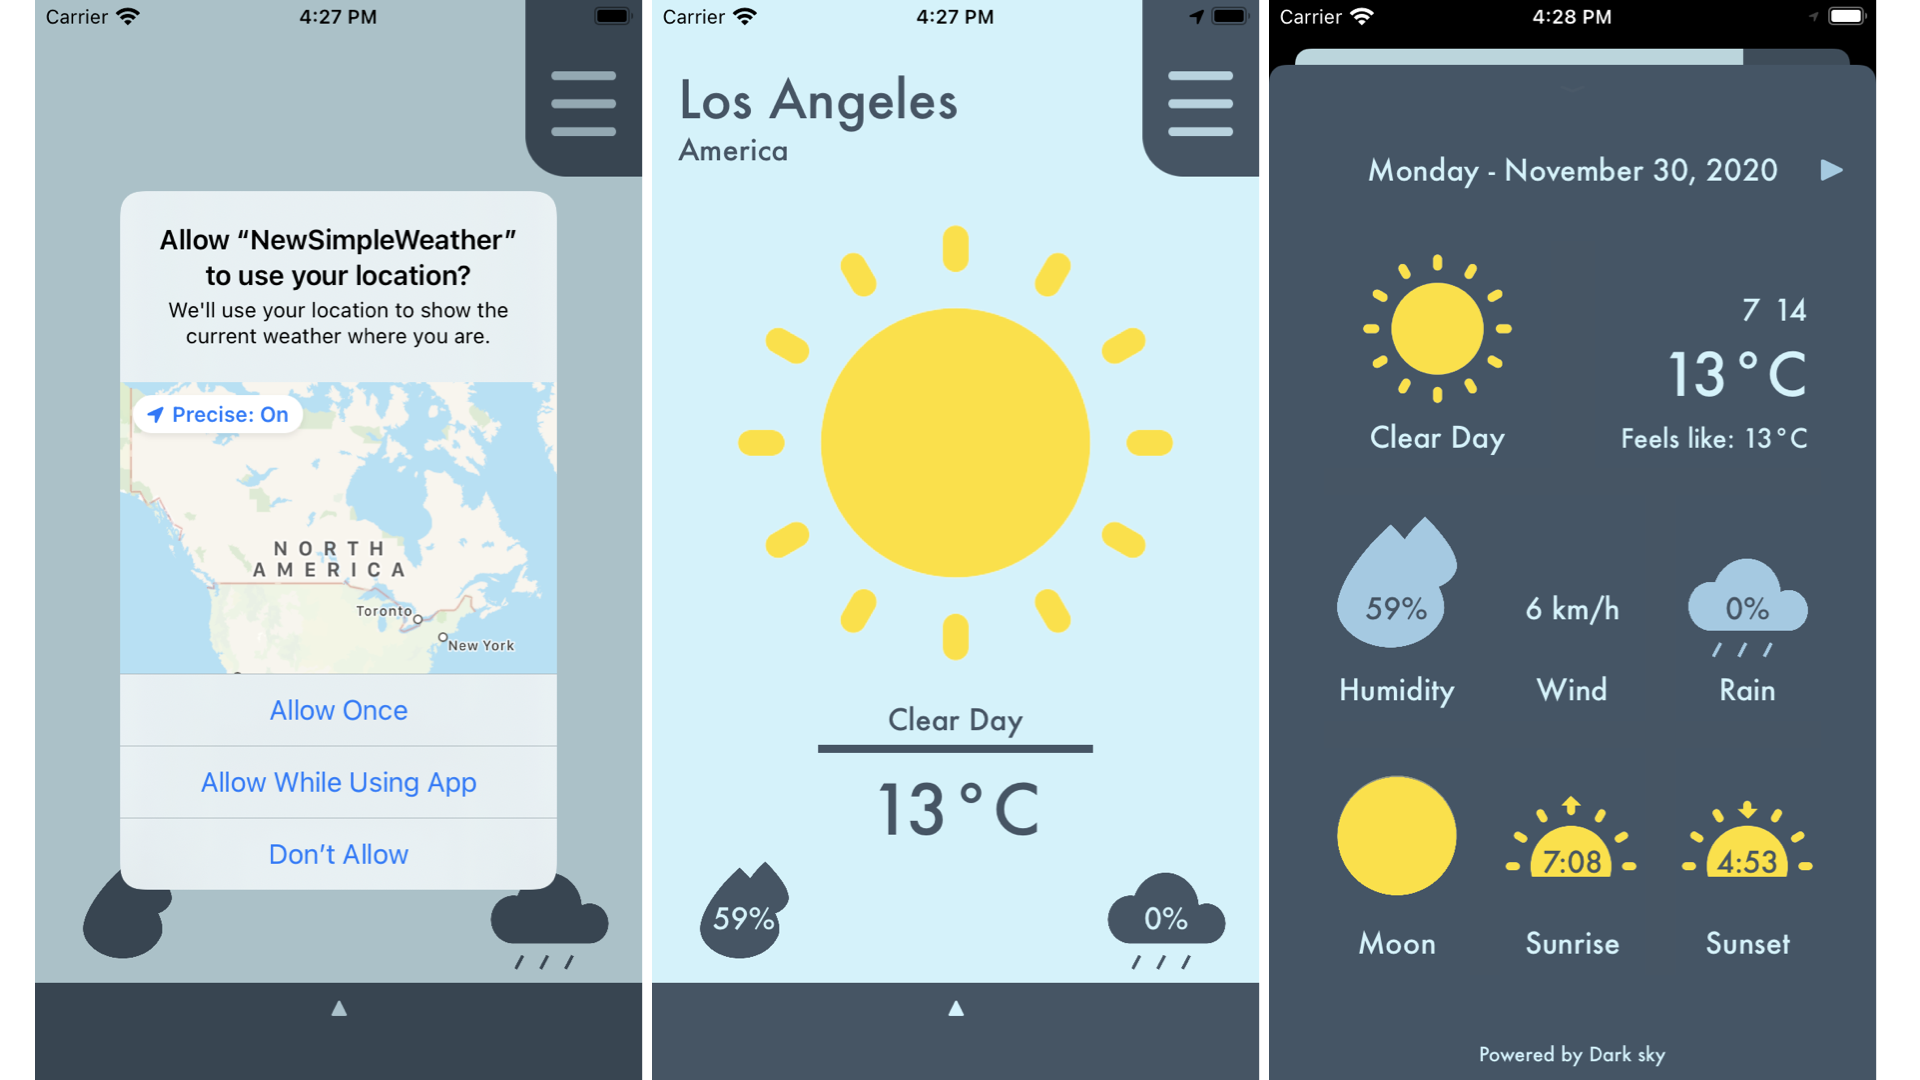 three screen shots. First showing the alert asking for location permission. Second showing the main screen of the app. Third showing the date, current weather and other relevant information as the current state (sunny), min and max temperature, humidity, rain probability, time when the sun rises and when it sets